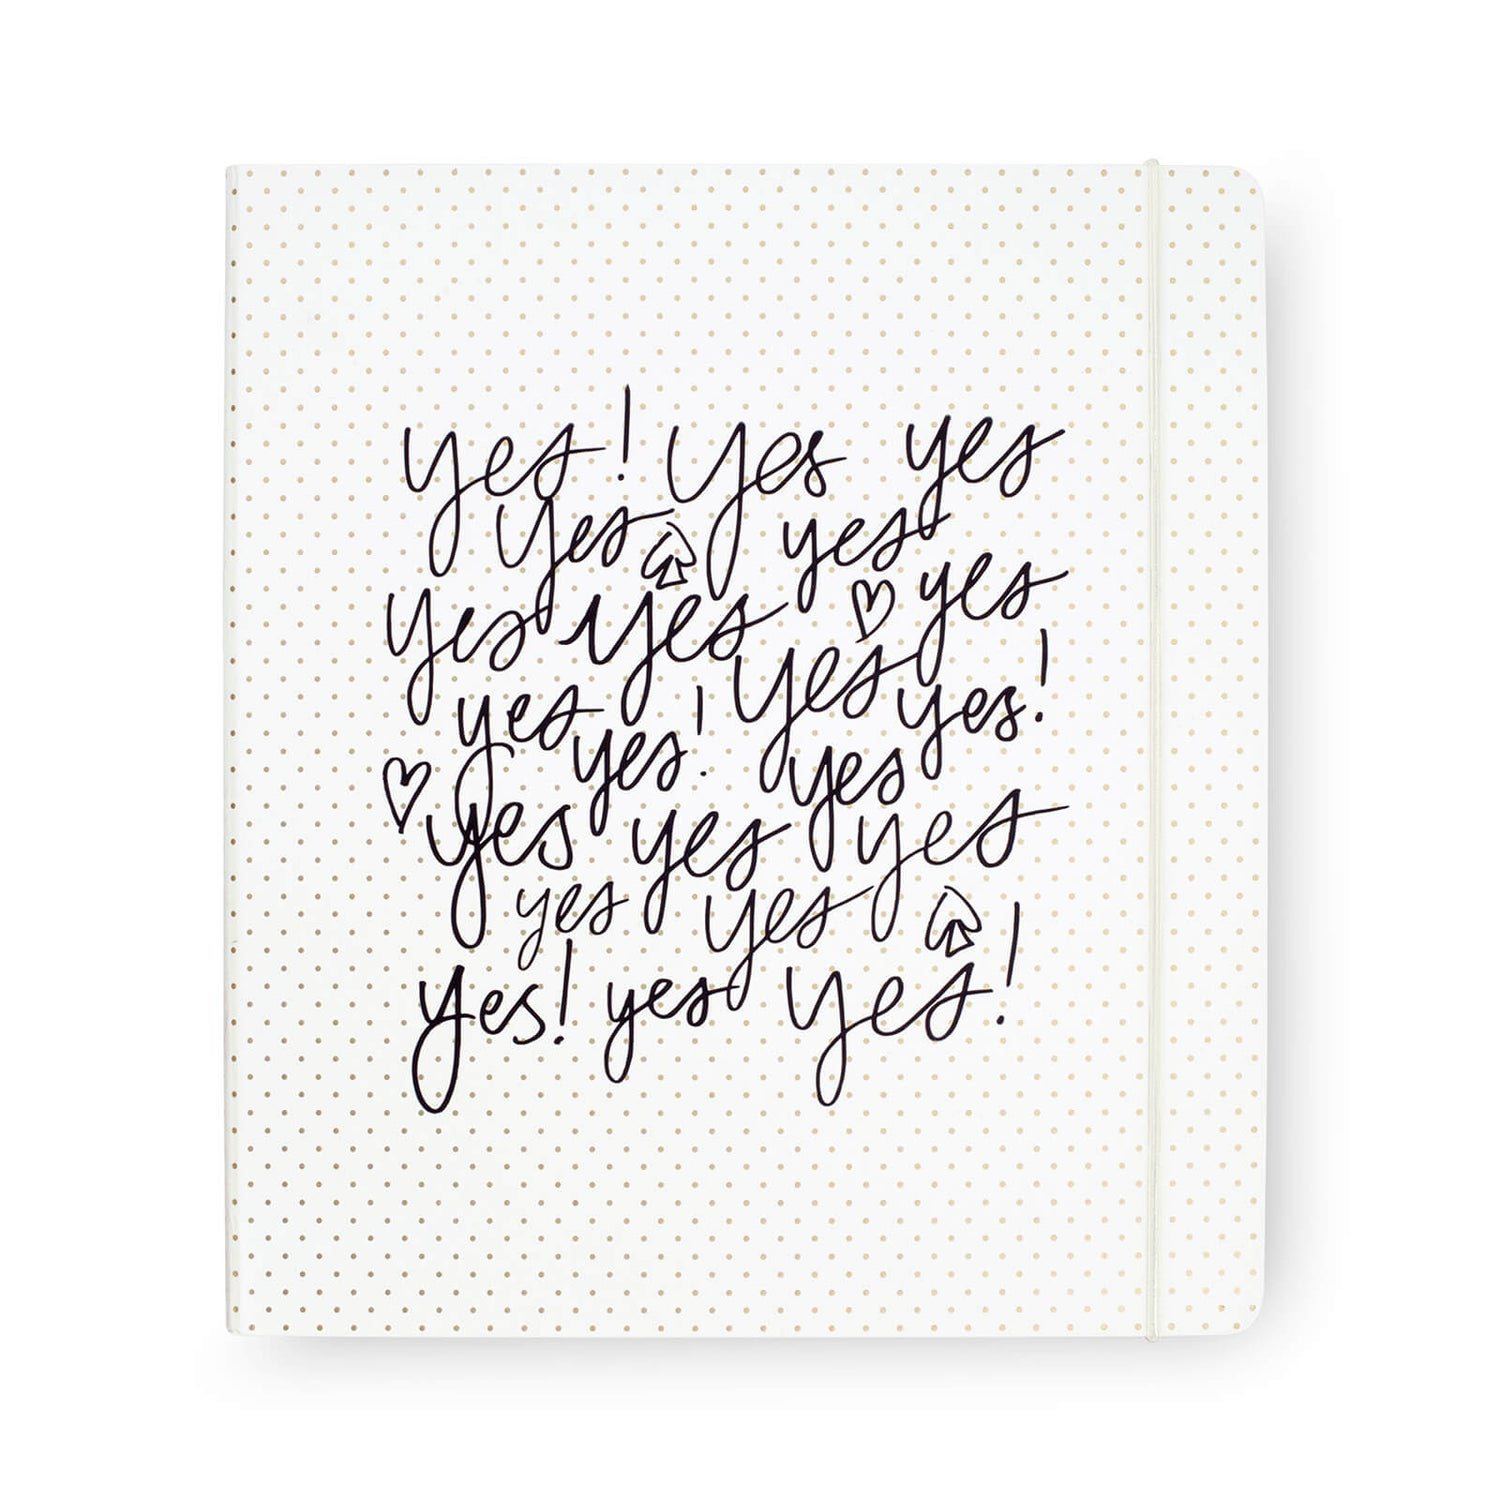 Kate Spade New York Bridal Planner - Yes Yes Yes